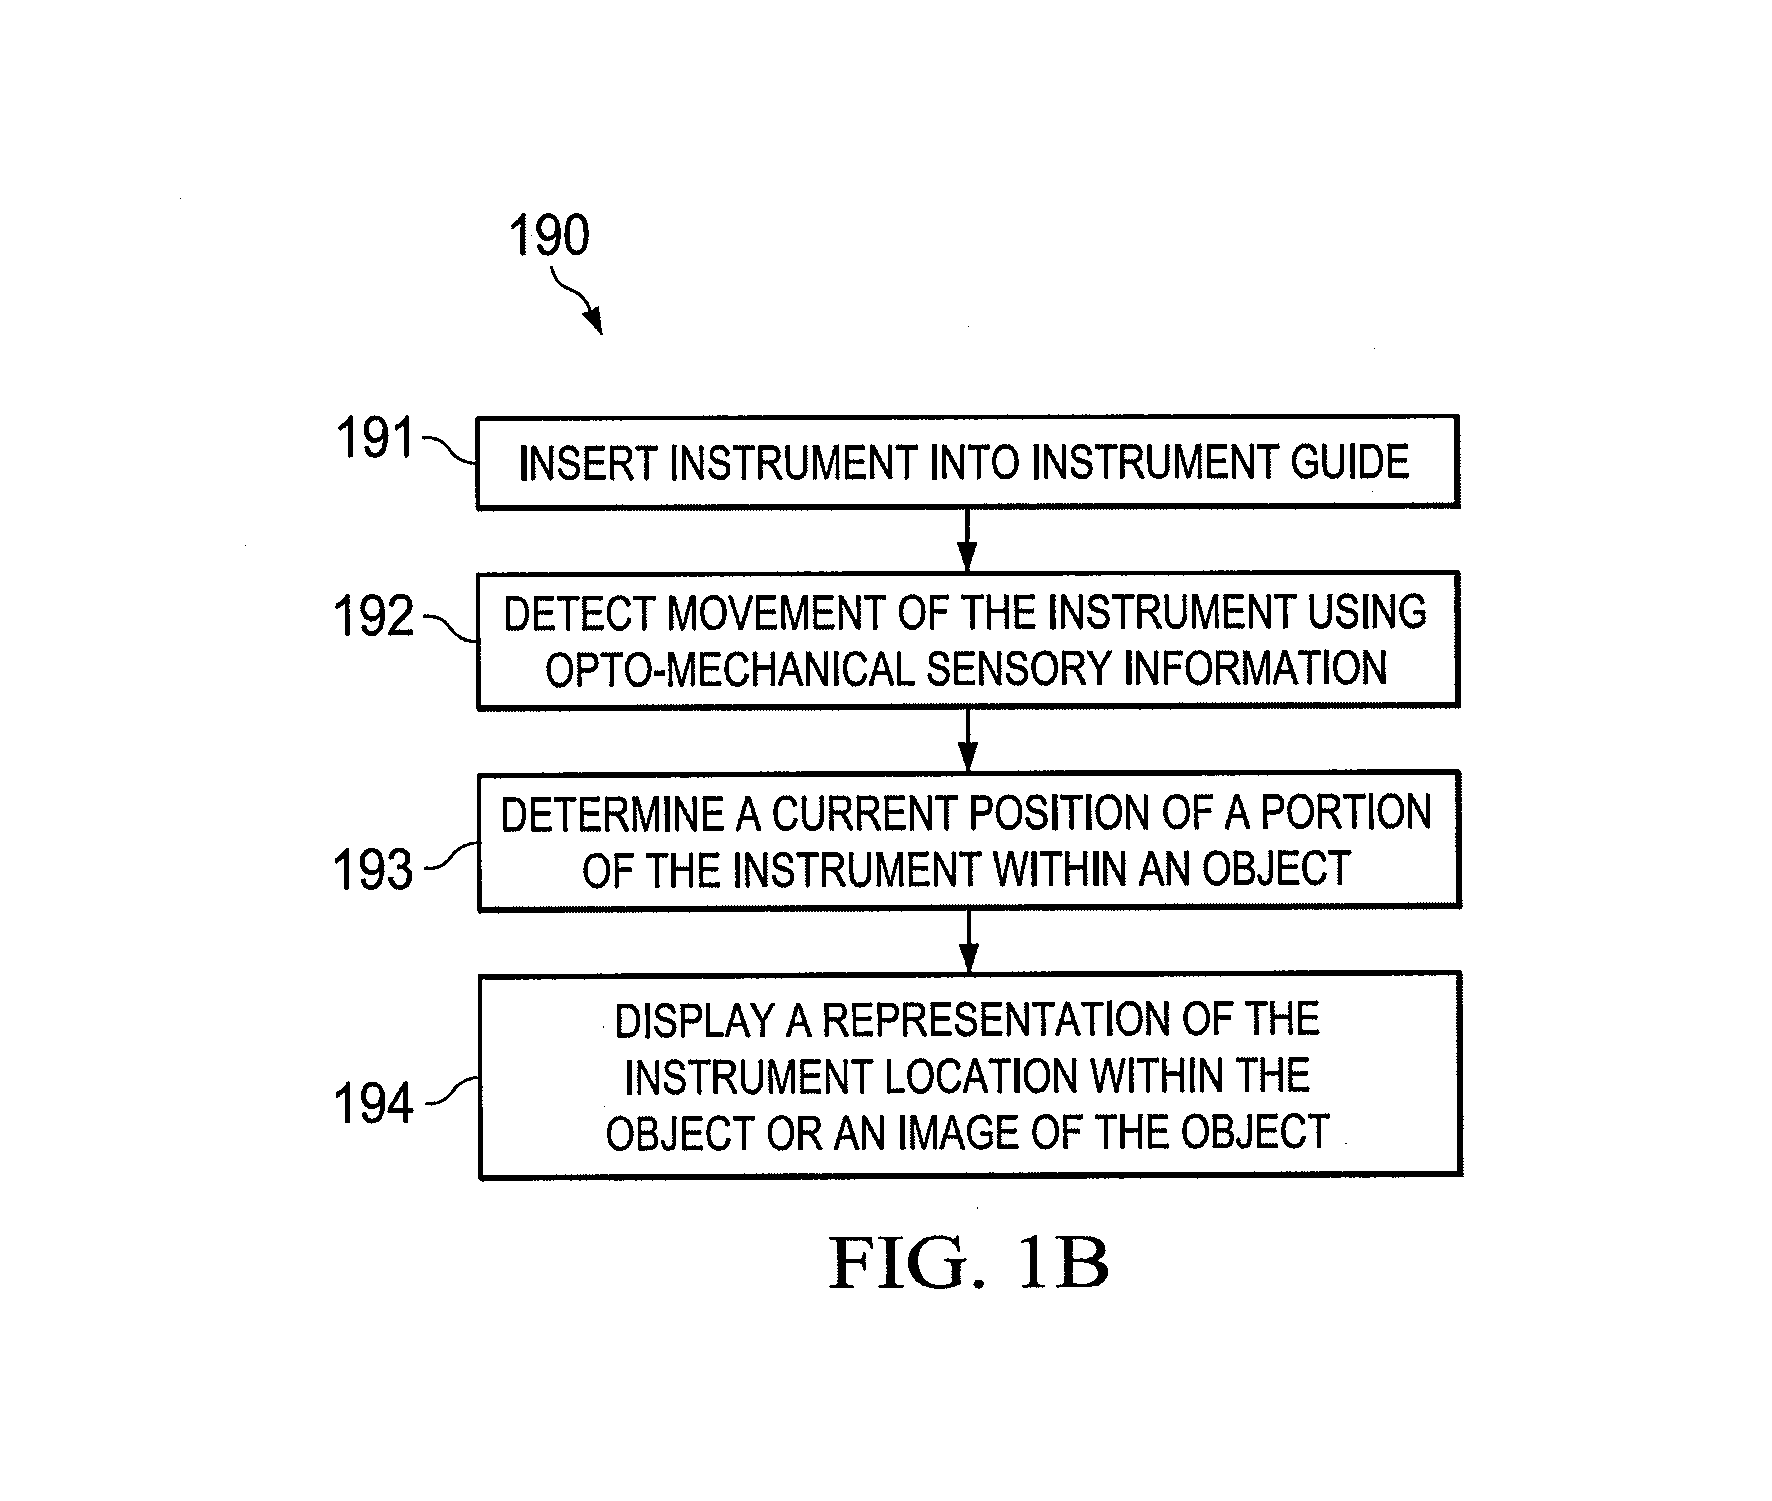 Systems and methods for assisting with internal positioning of instruments